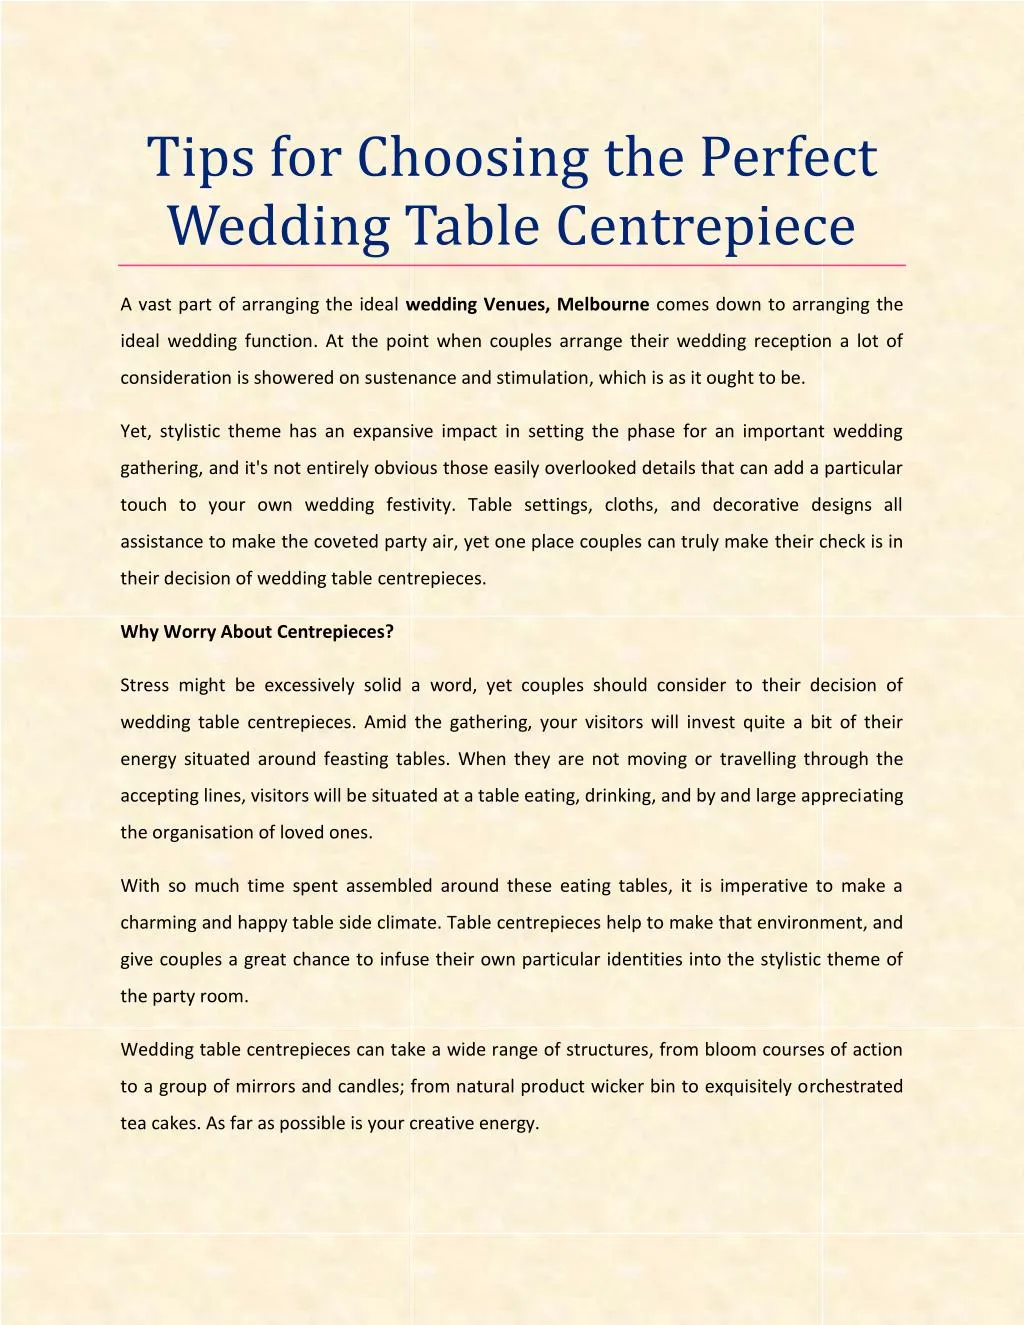 tips for choosing the perfect wedding table